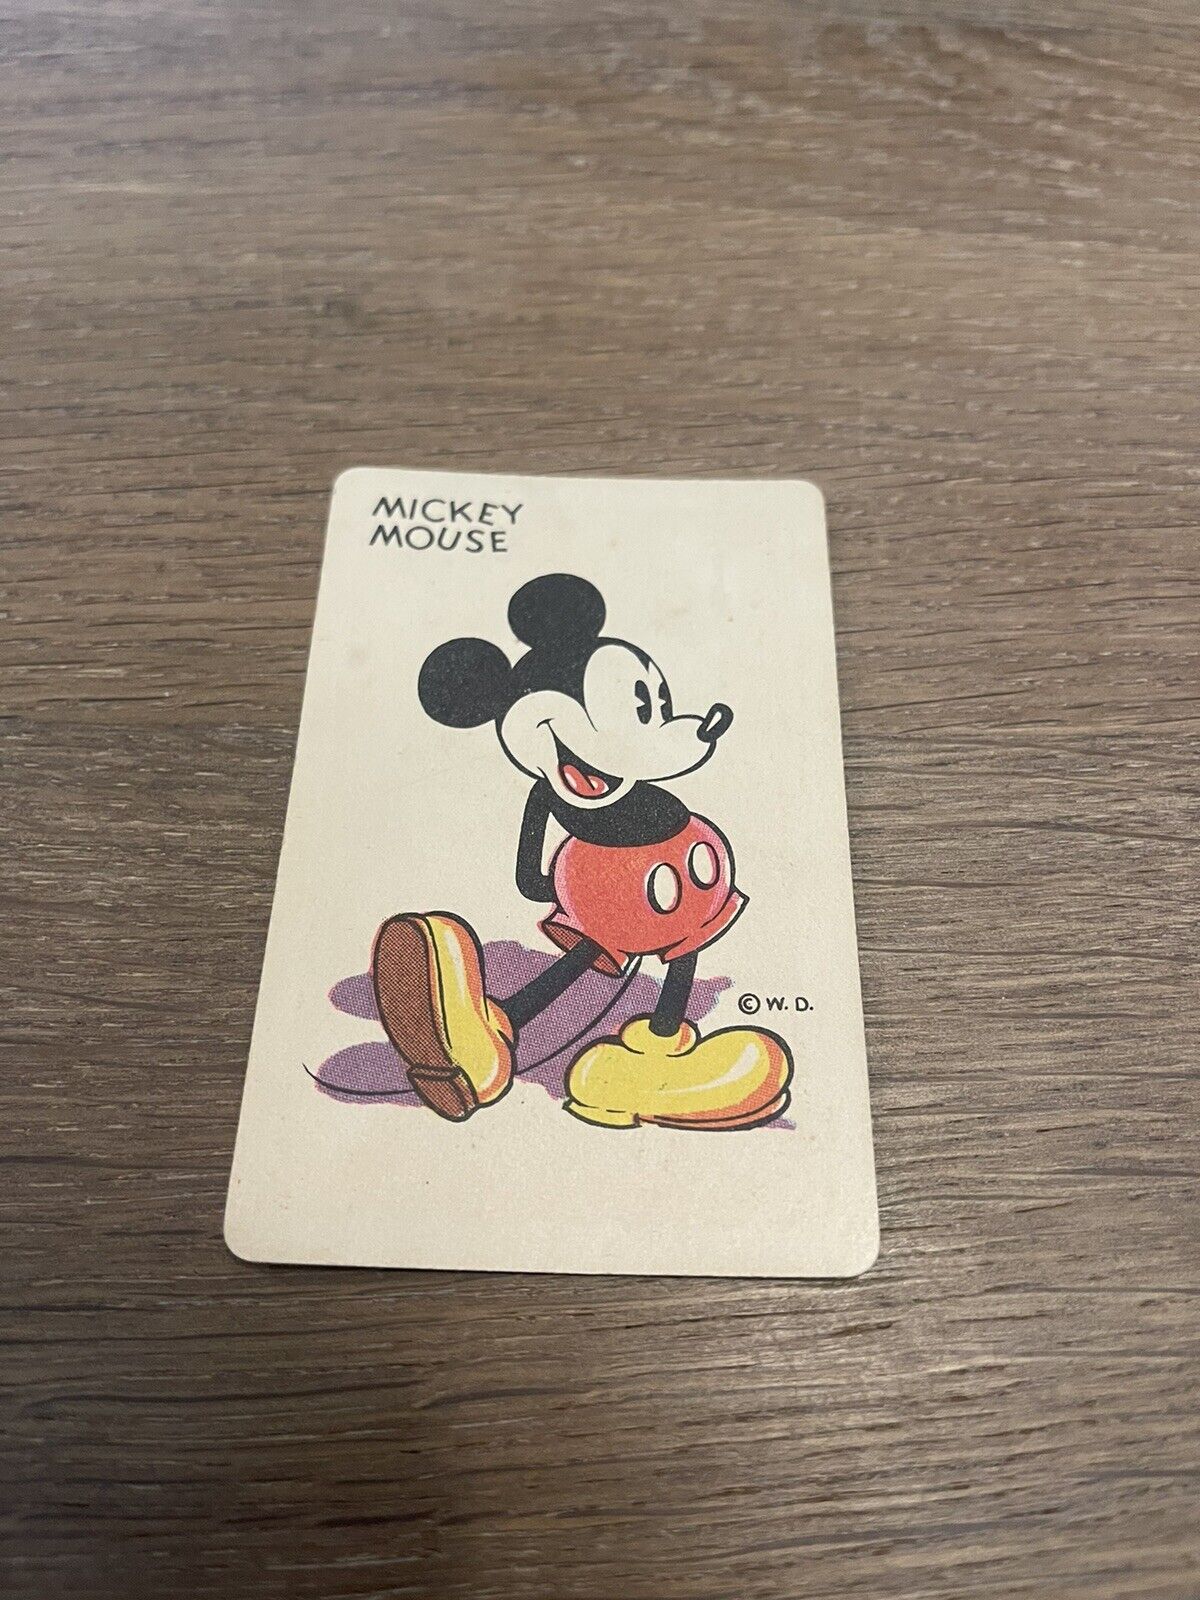 EXTREMELY RARE VINTAGE 1930s WHITMAN PUBLISHING MICKEY MOUSE OLD MAID CARD